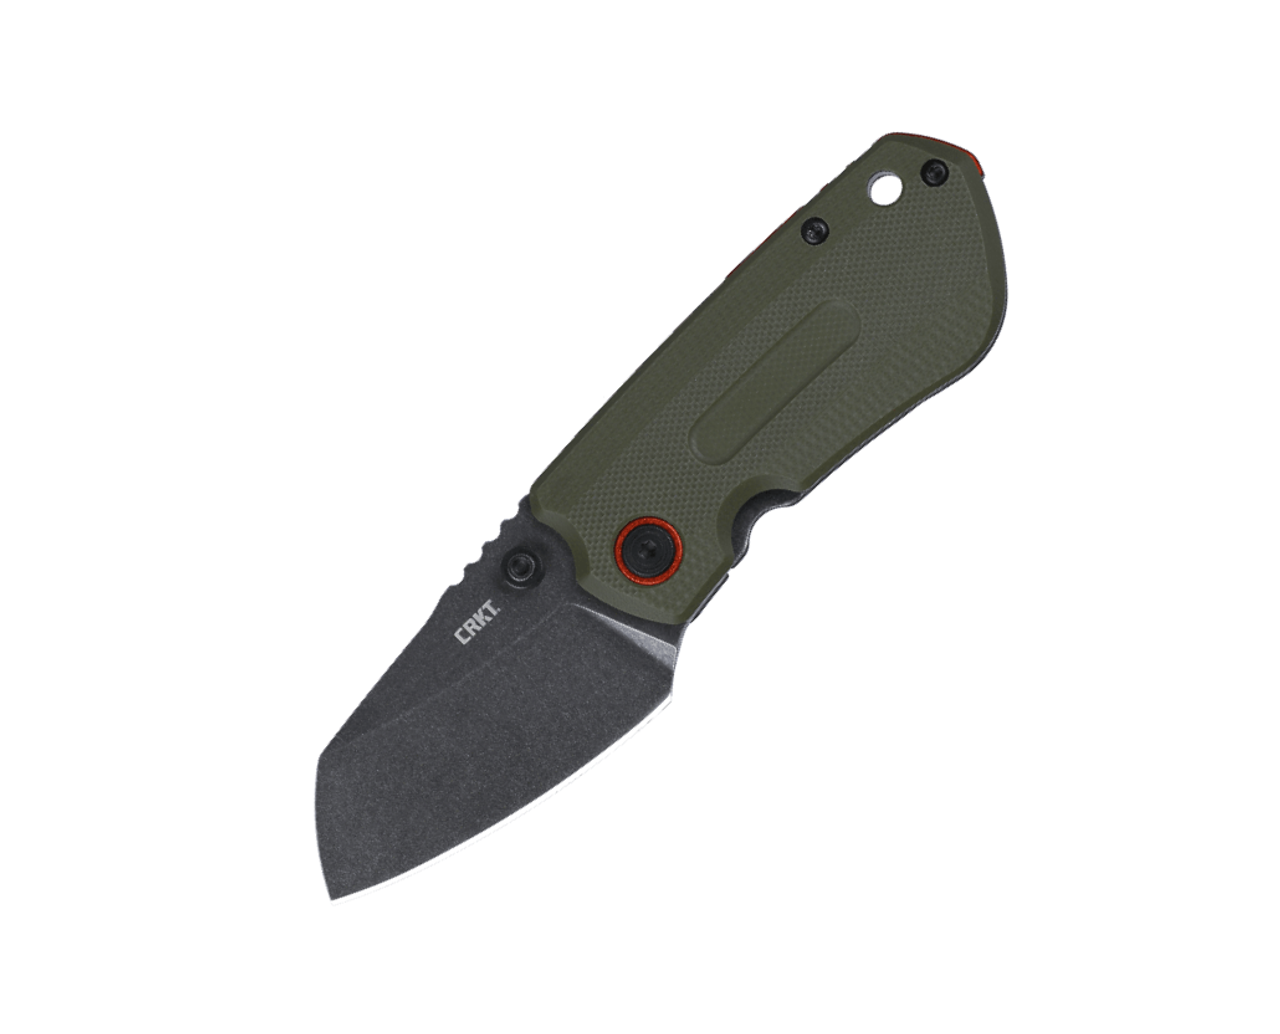 CRKT Overland Compact (6277) 2.24" D2 Satin Reverse Tanto Plain Blade, Green G-10 Front Stainless Steel Back Handle